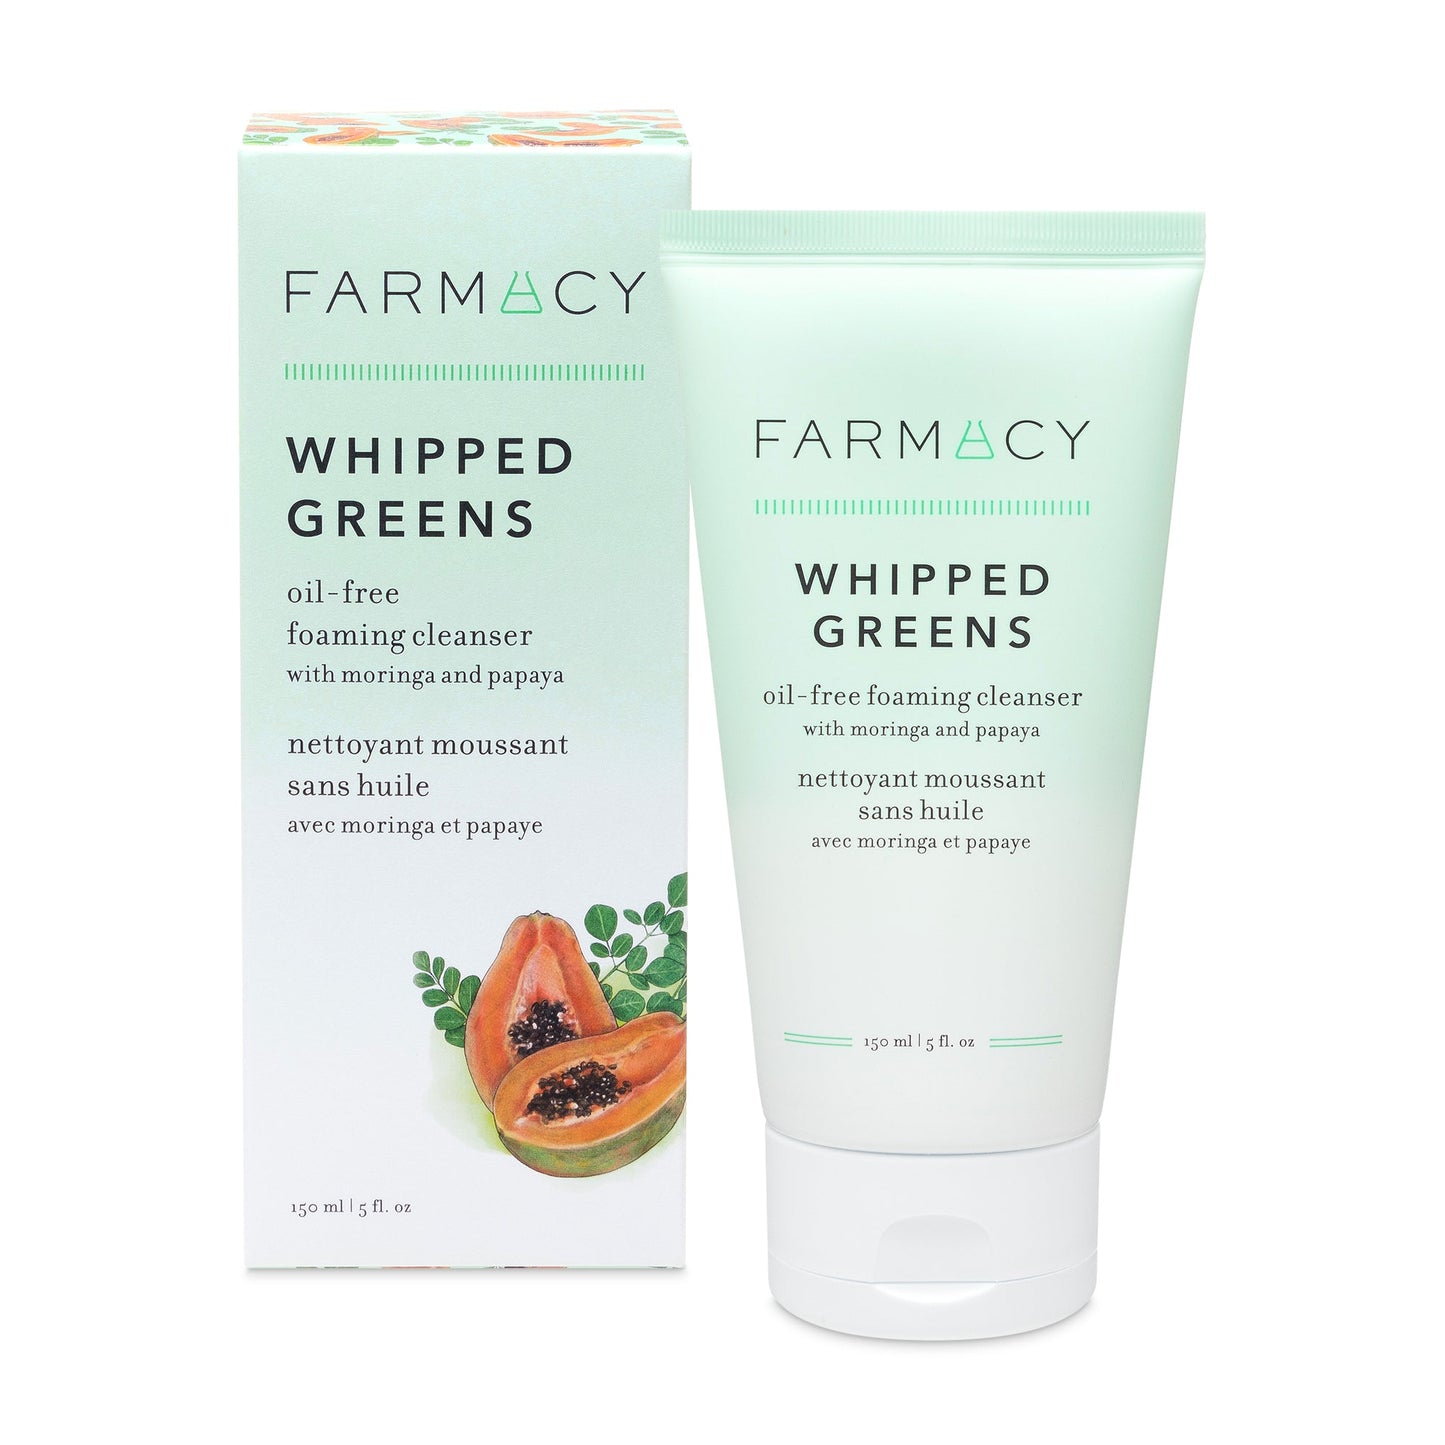 Farmacy Whipped Greens Oil-Free Foaming Cleanser 150ml